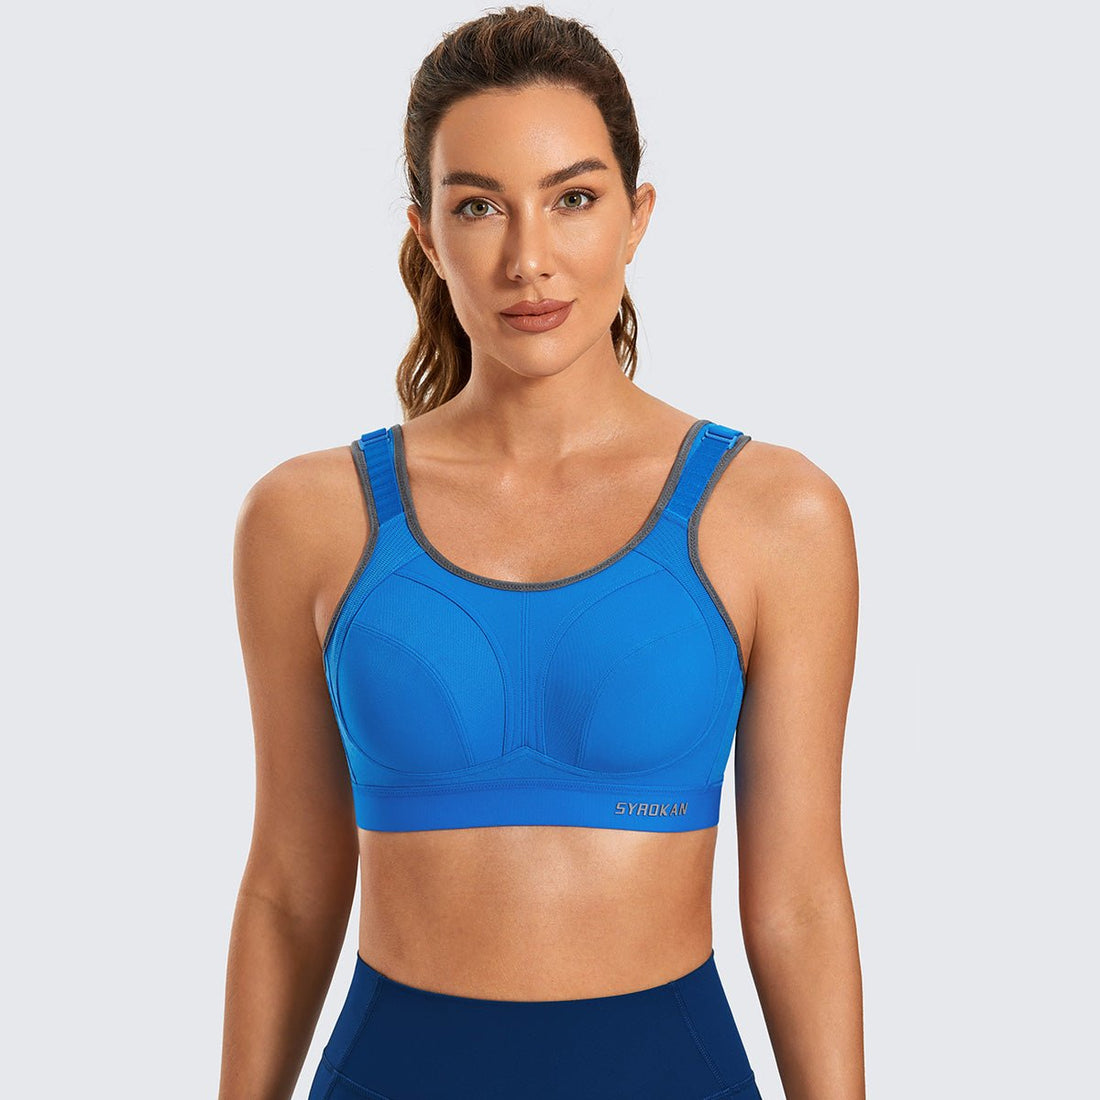 Pressure Relieve Adjustable Front Straps Wireless Bounce Control Blue Workout Bra - 0cm